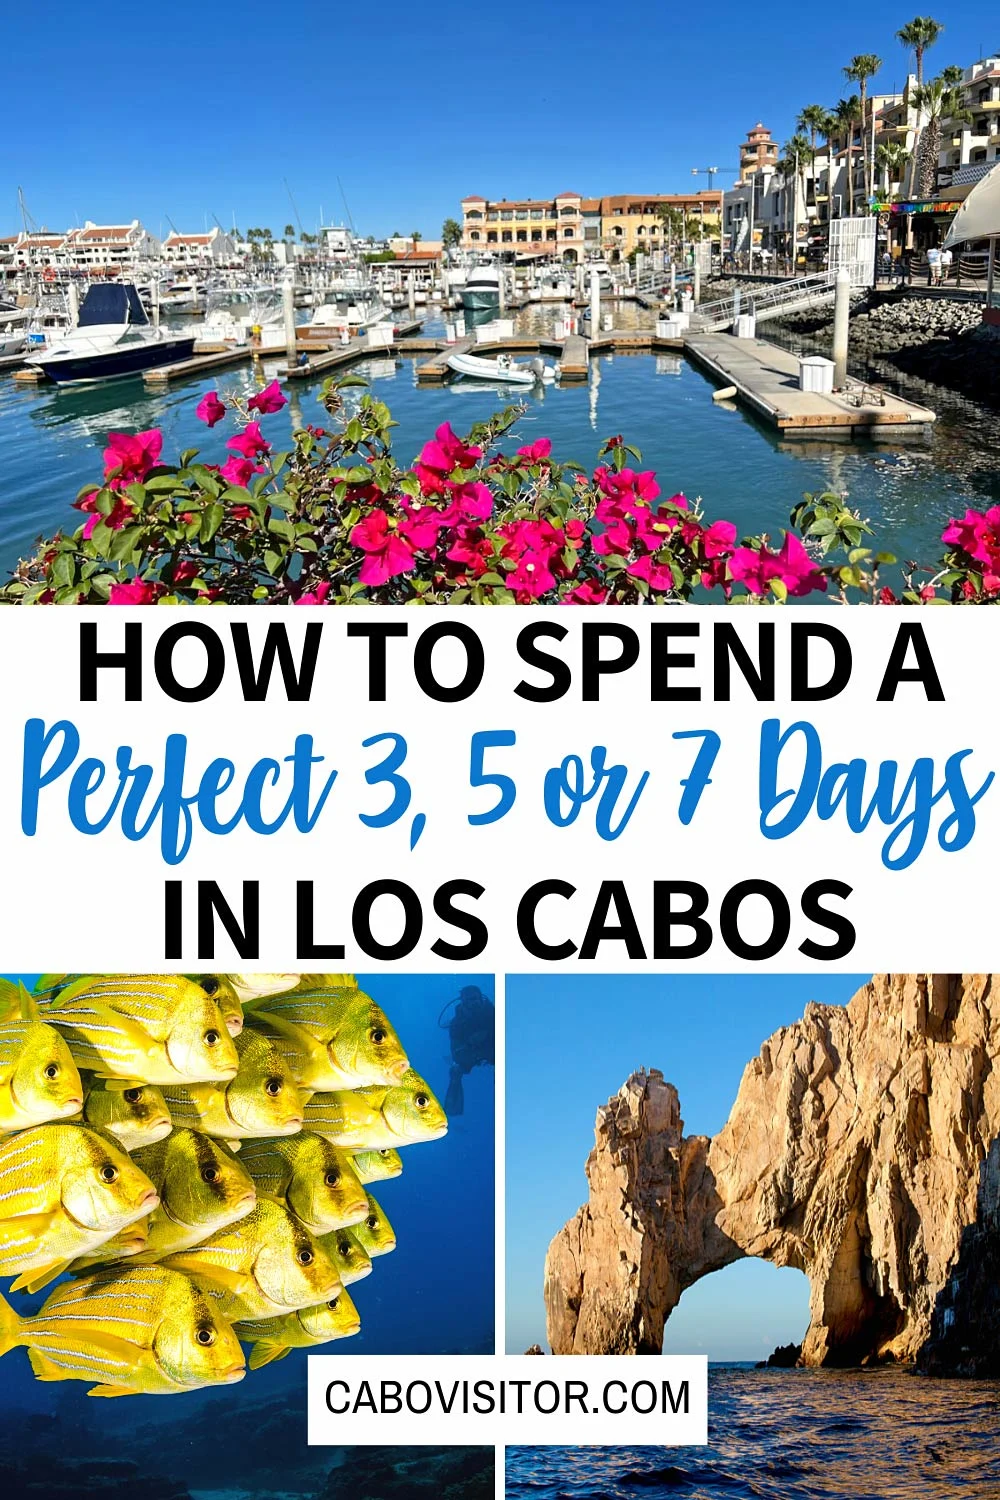 The perfect Cabo itinerary for 3, 5 or 7 days in Cabo San Lucas